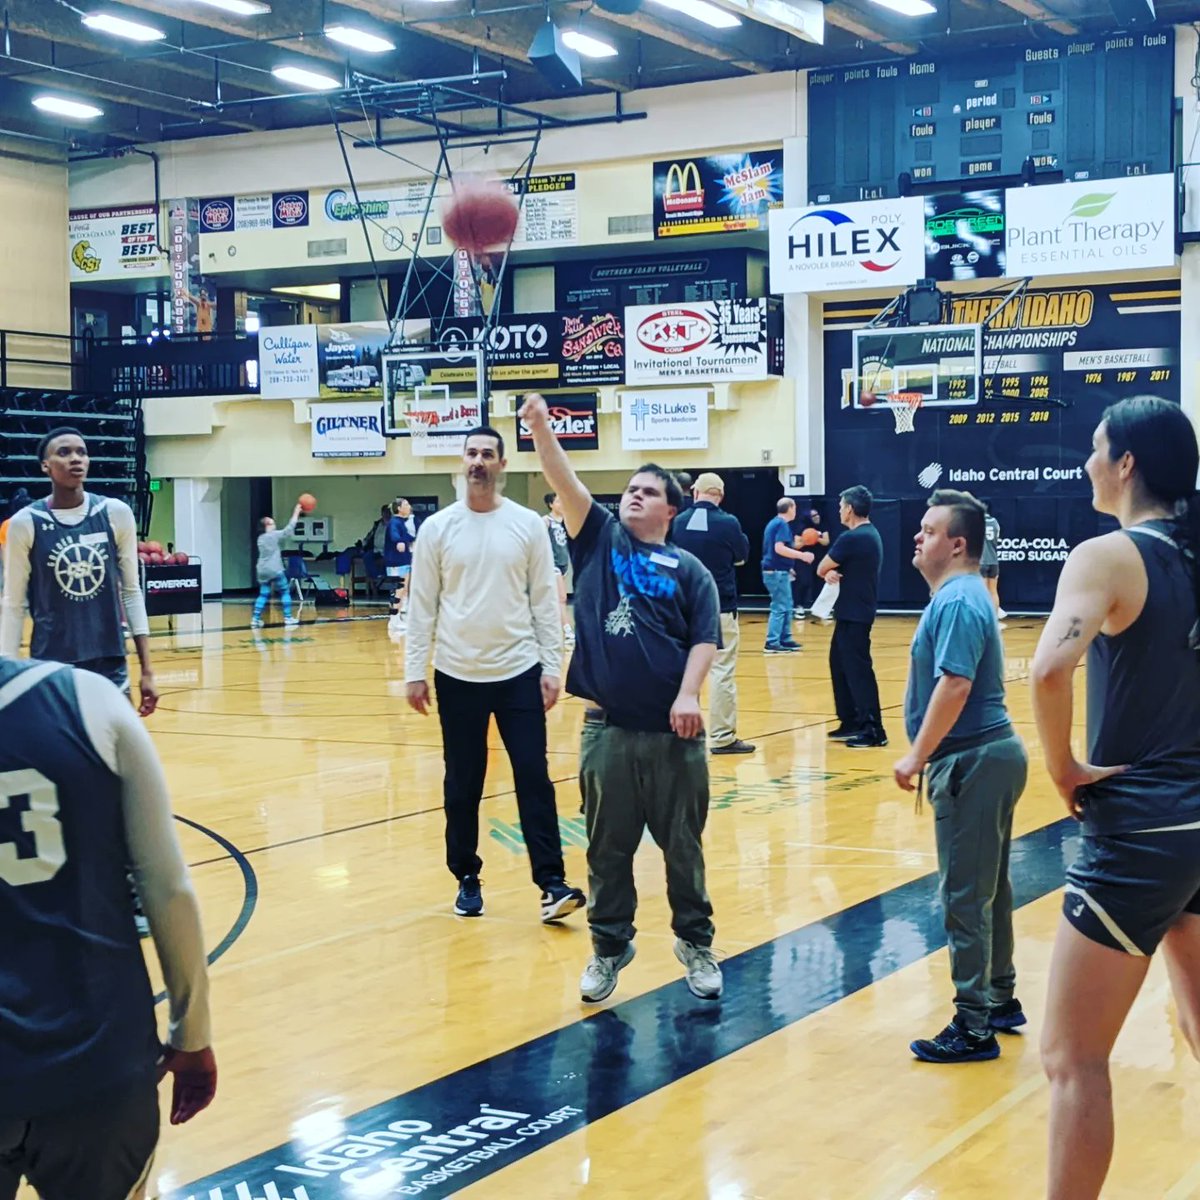 Our @CSI_WBB enjoyed running a practice with a group from Western Connections( disability service)

#communitycollegemonth